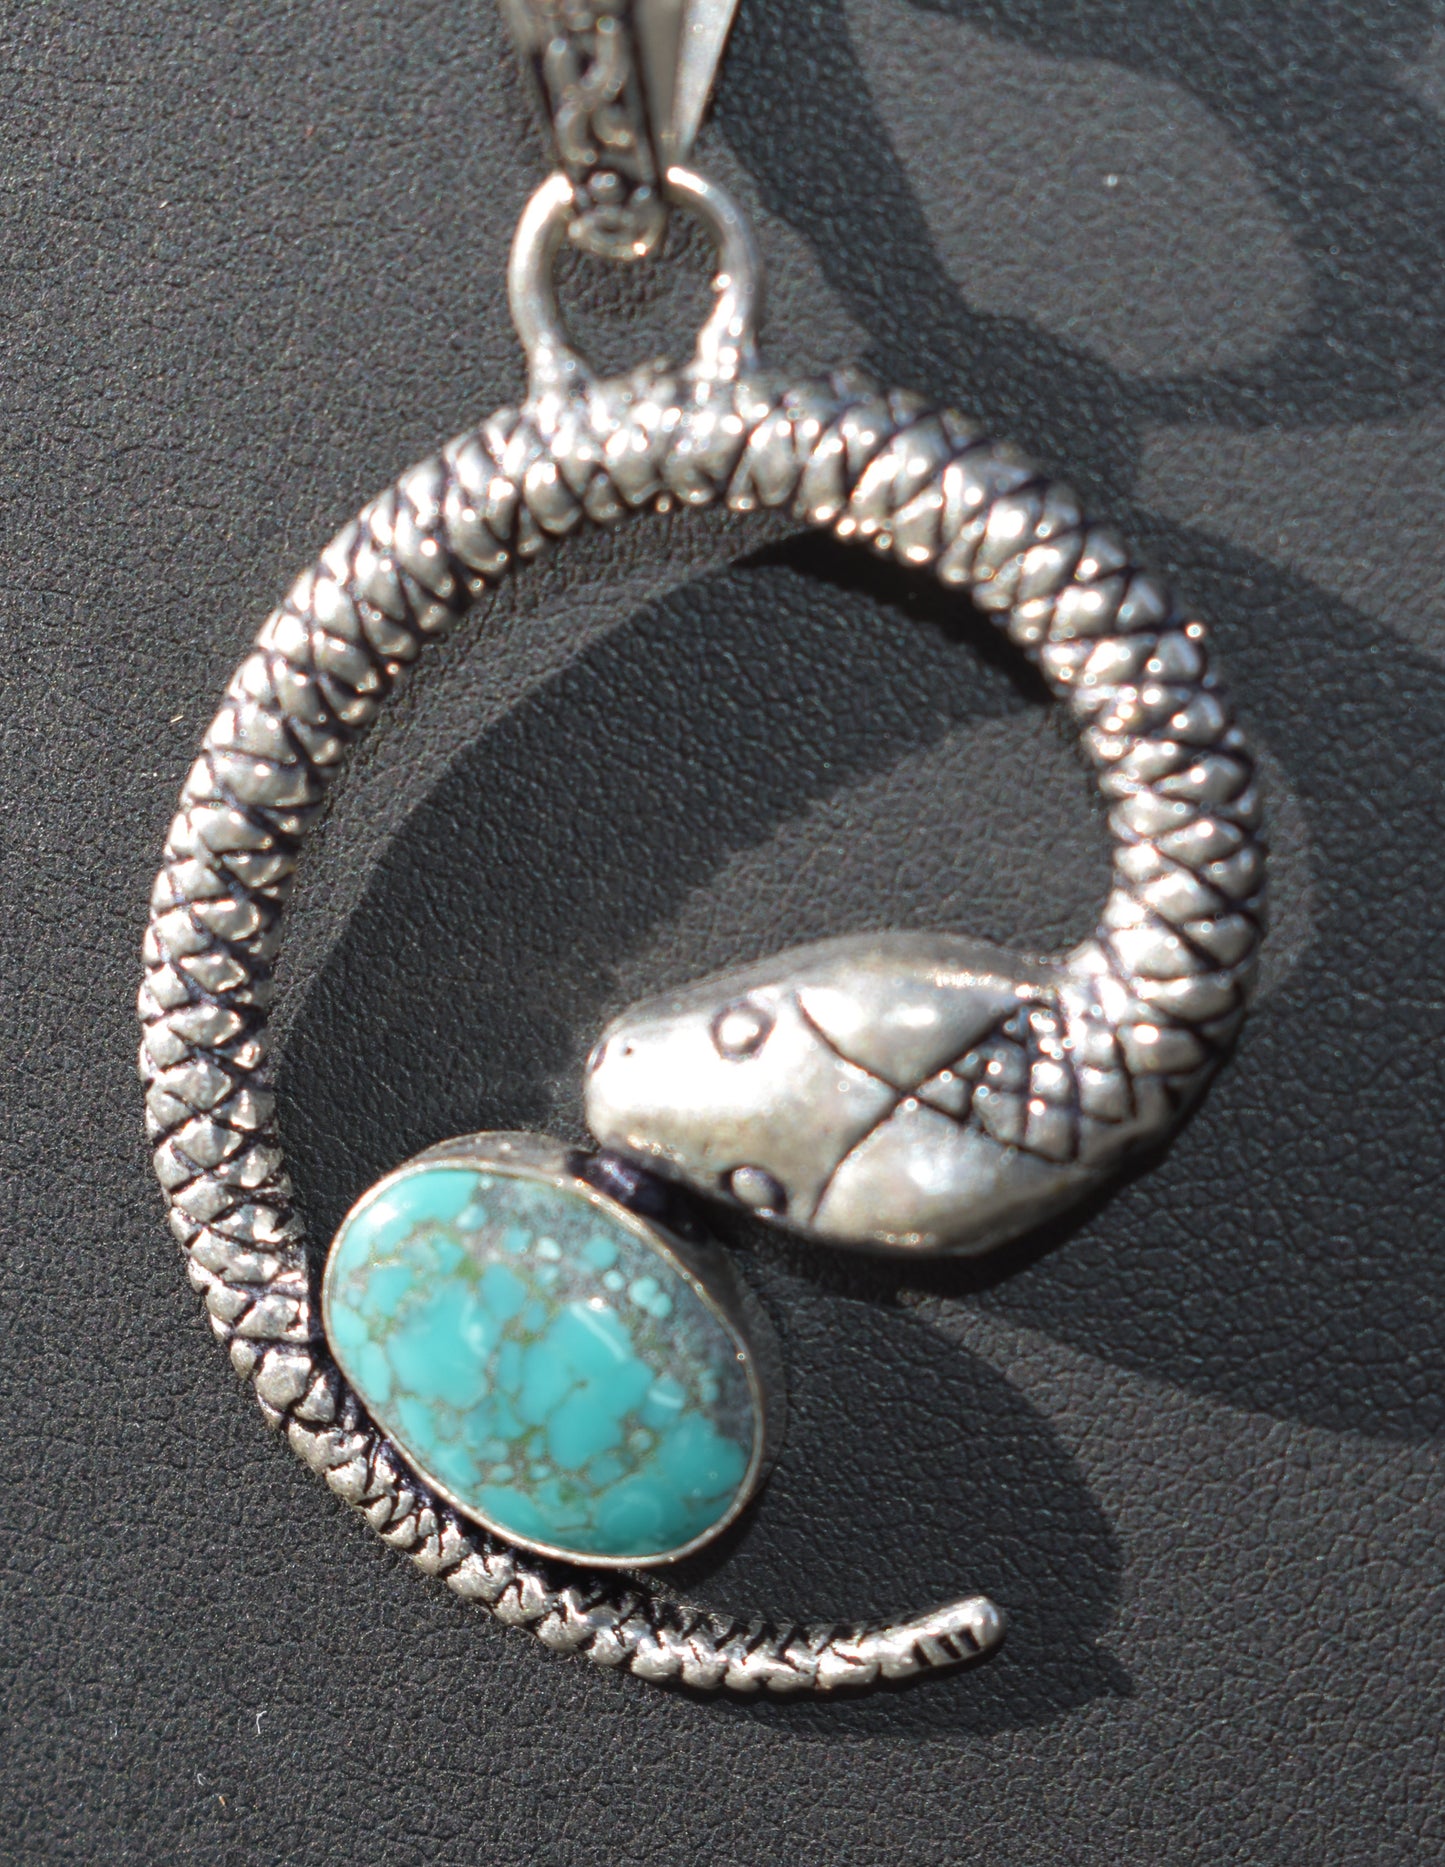 Turquoise Snake necklace